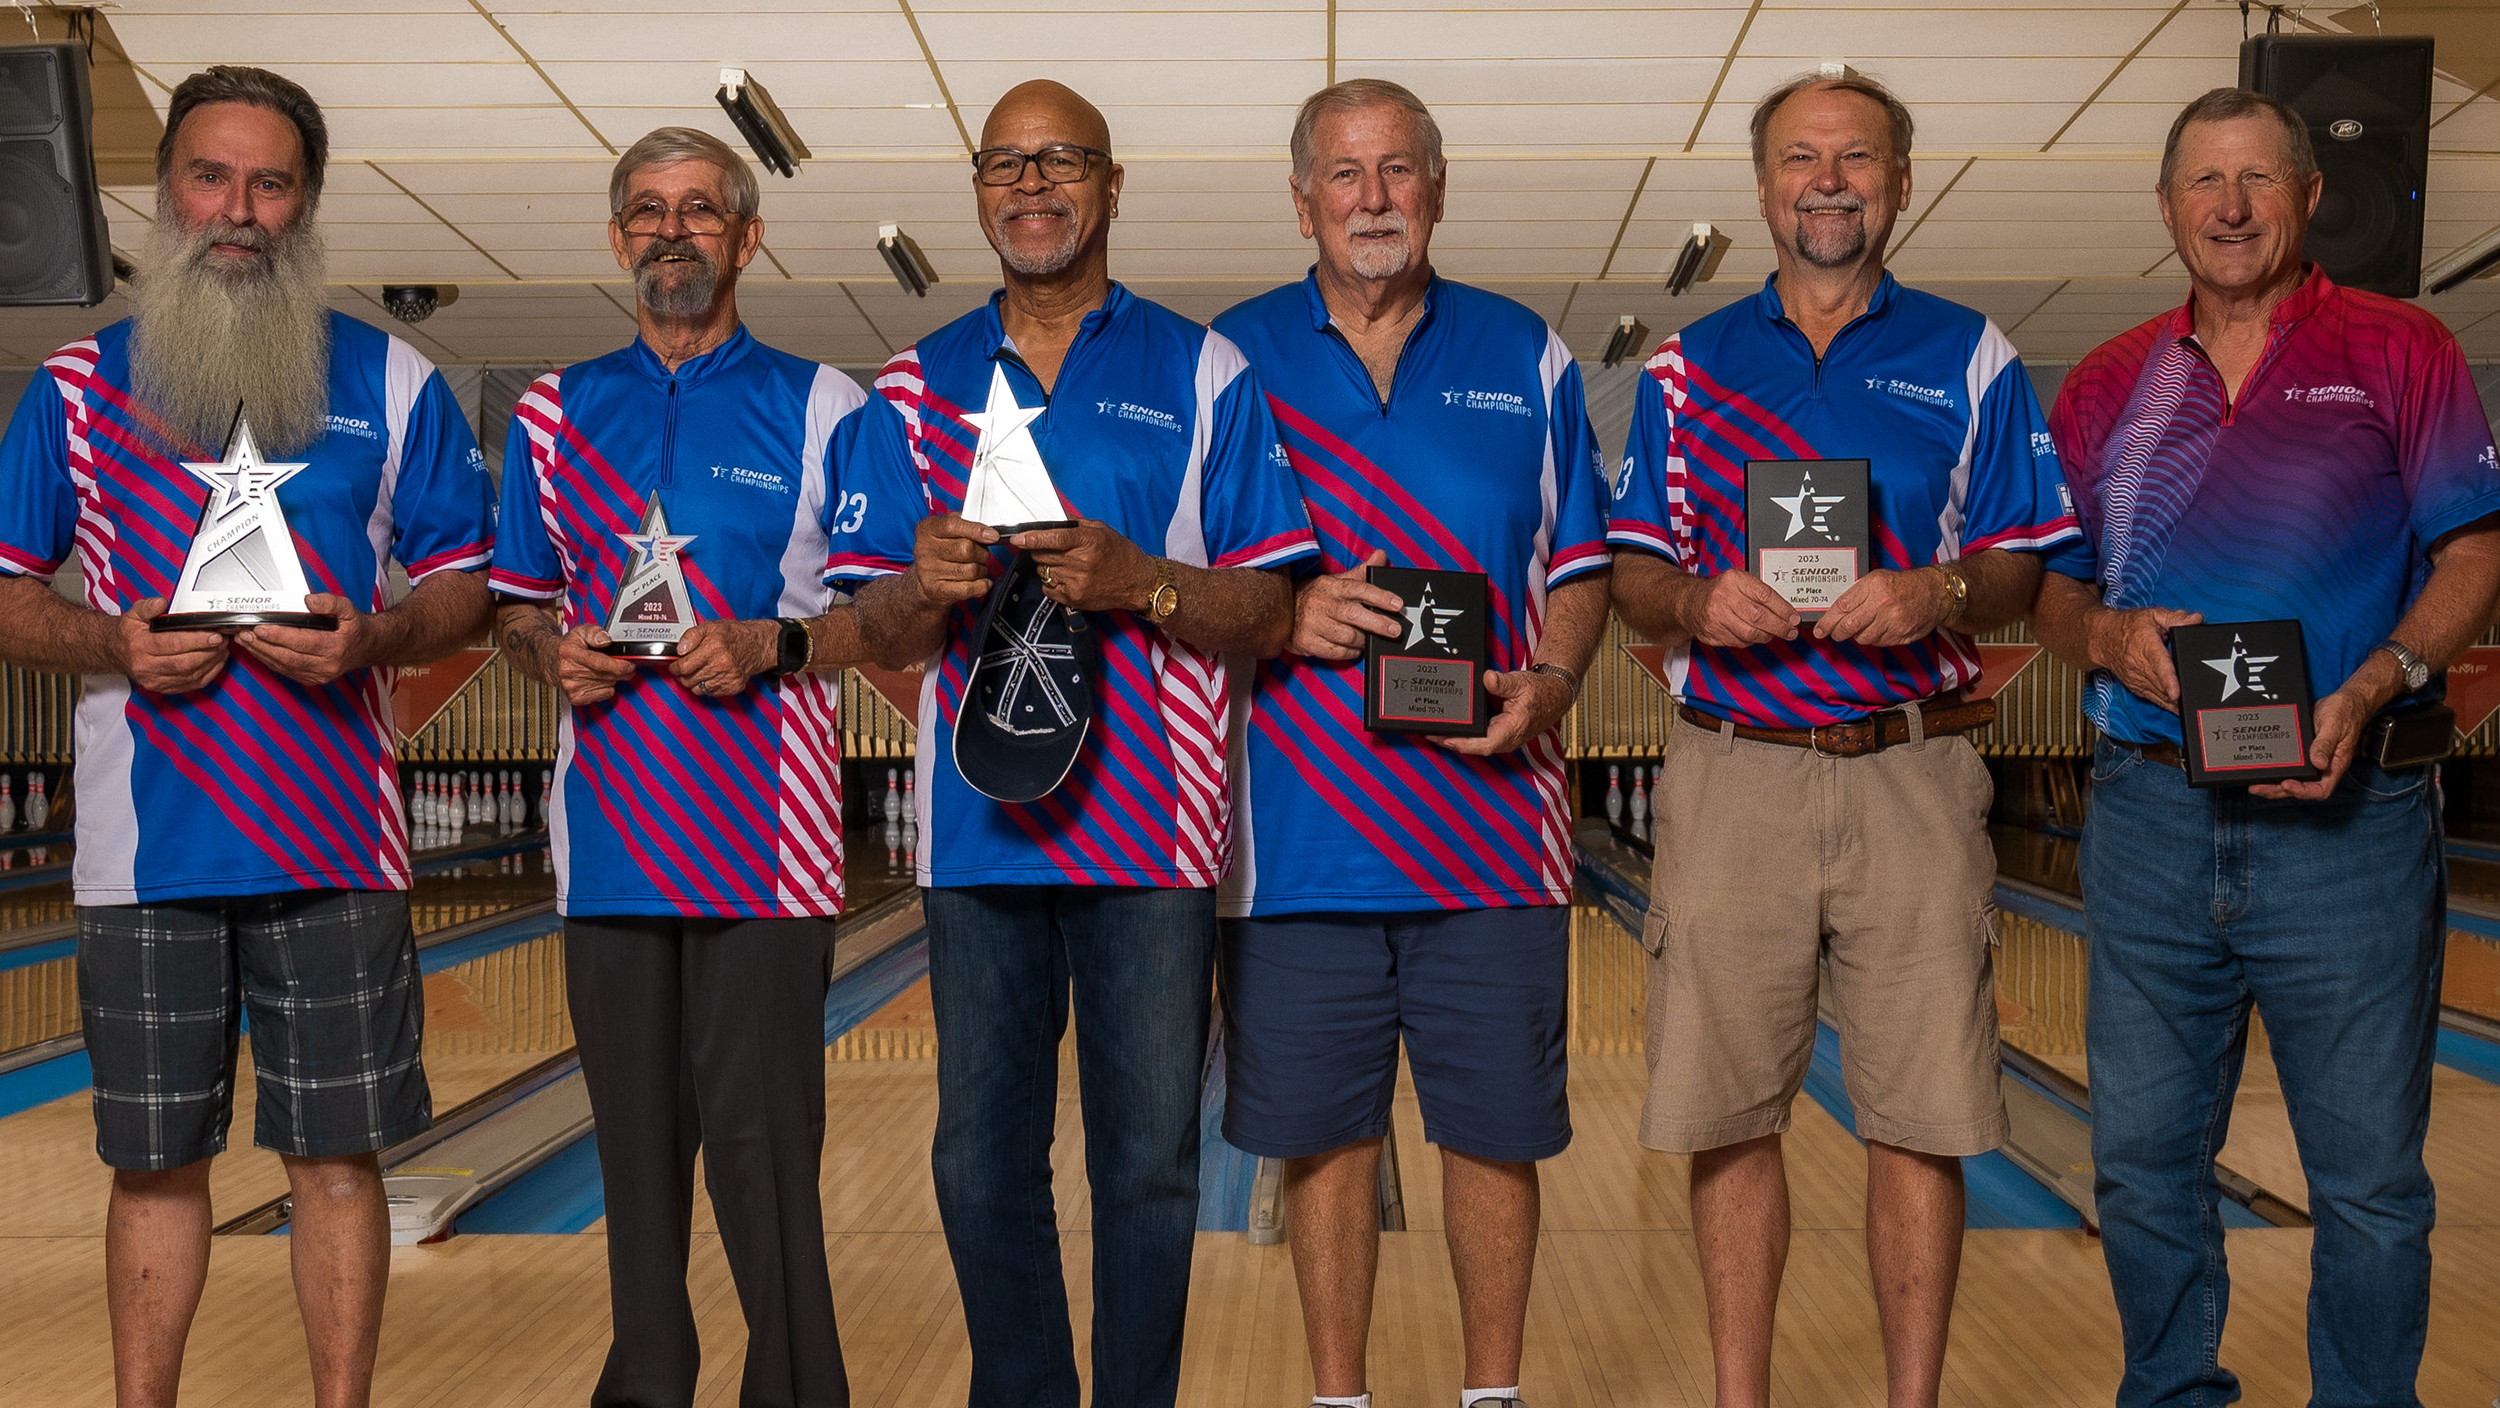 The top six finishers in Mixed 70-74 at the 2023 USBC Senior Championships.